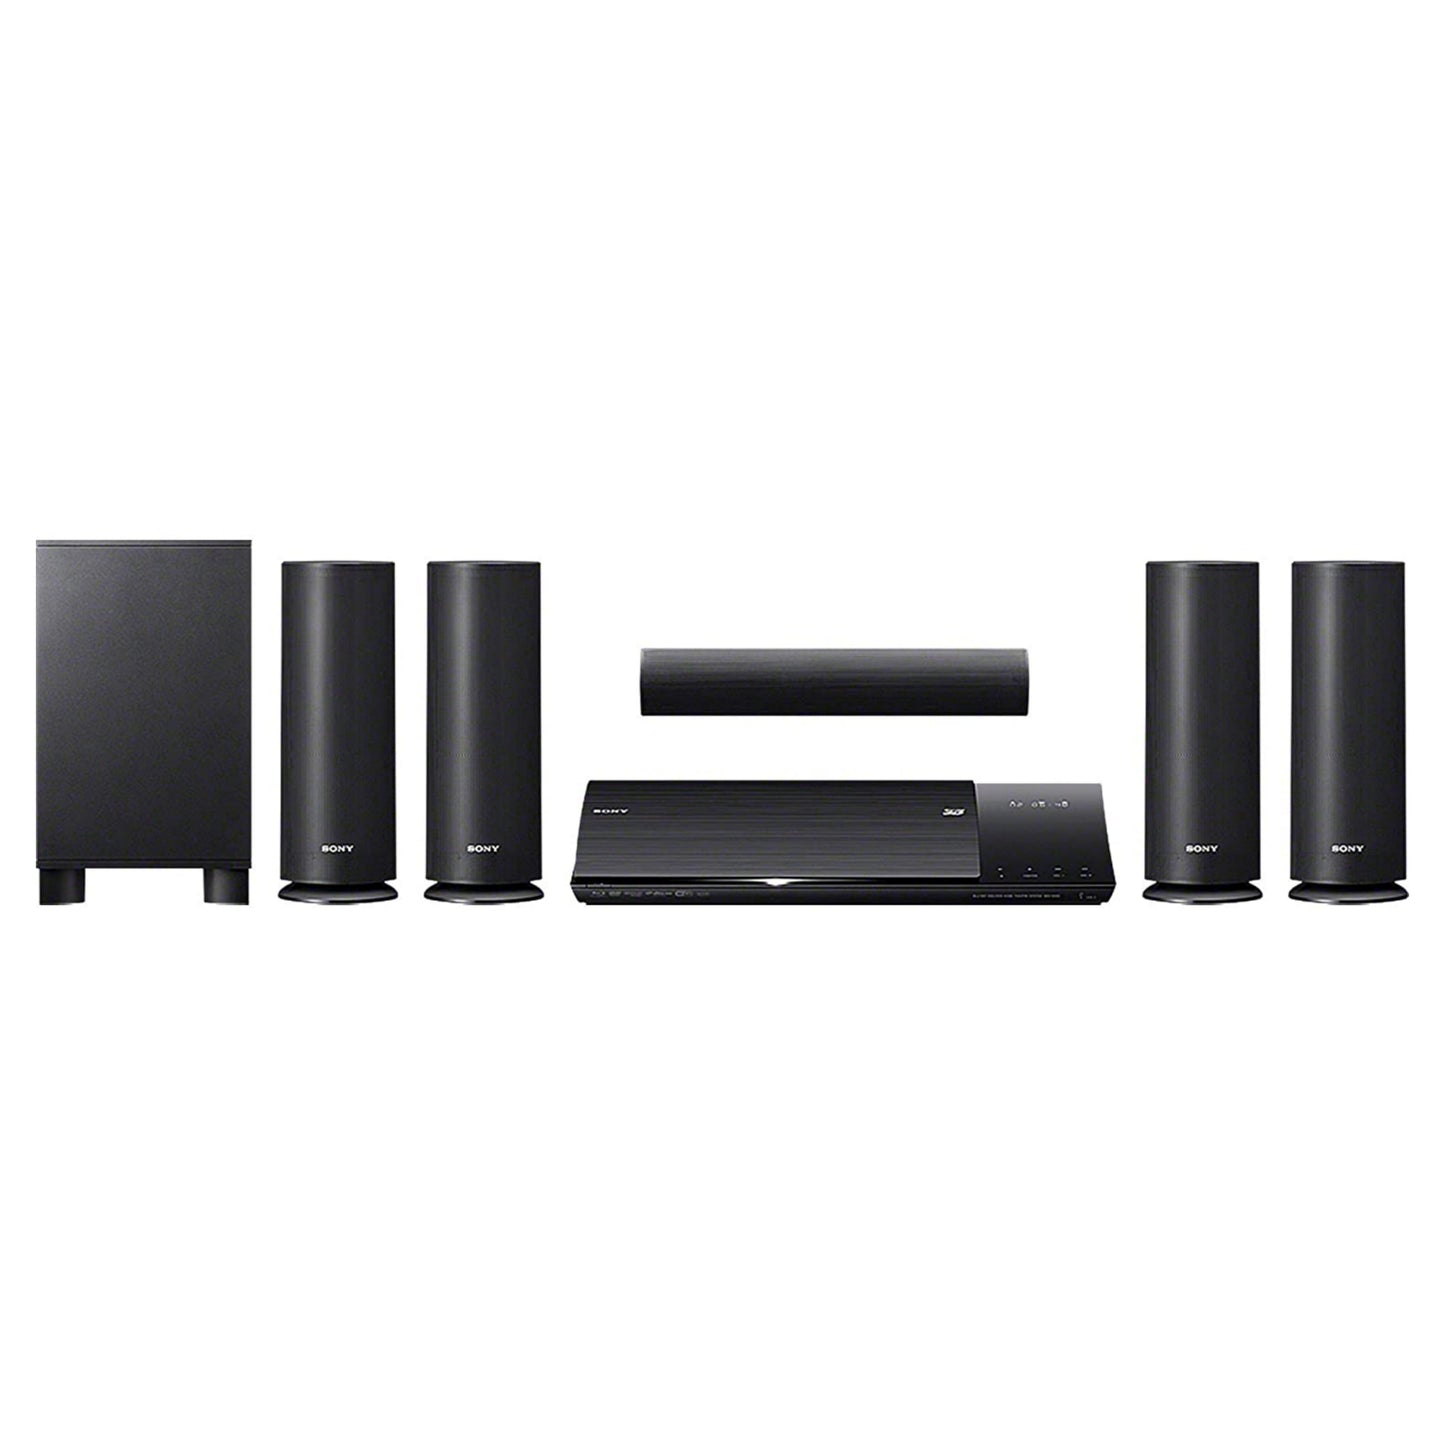 Sony BDV-N590 5.1Ch 1000W 3D Blu-ray DVD Home Theater System - Foreign Used